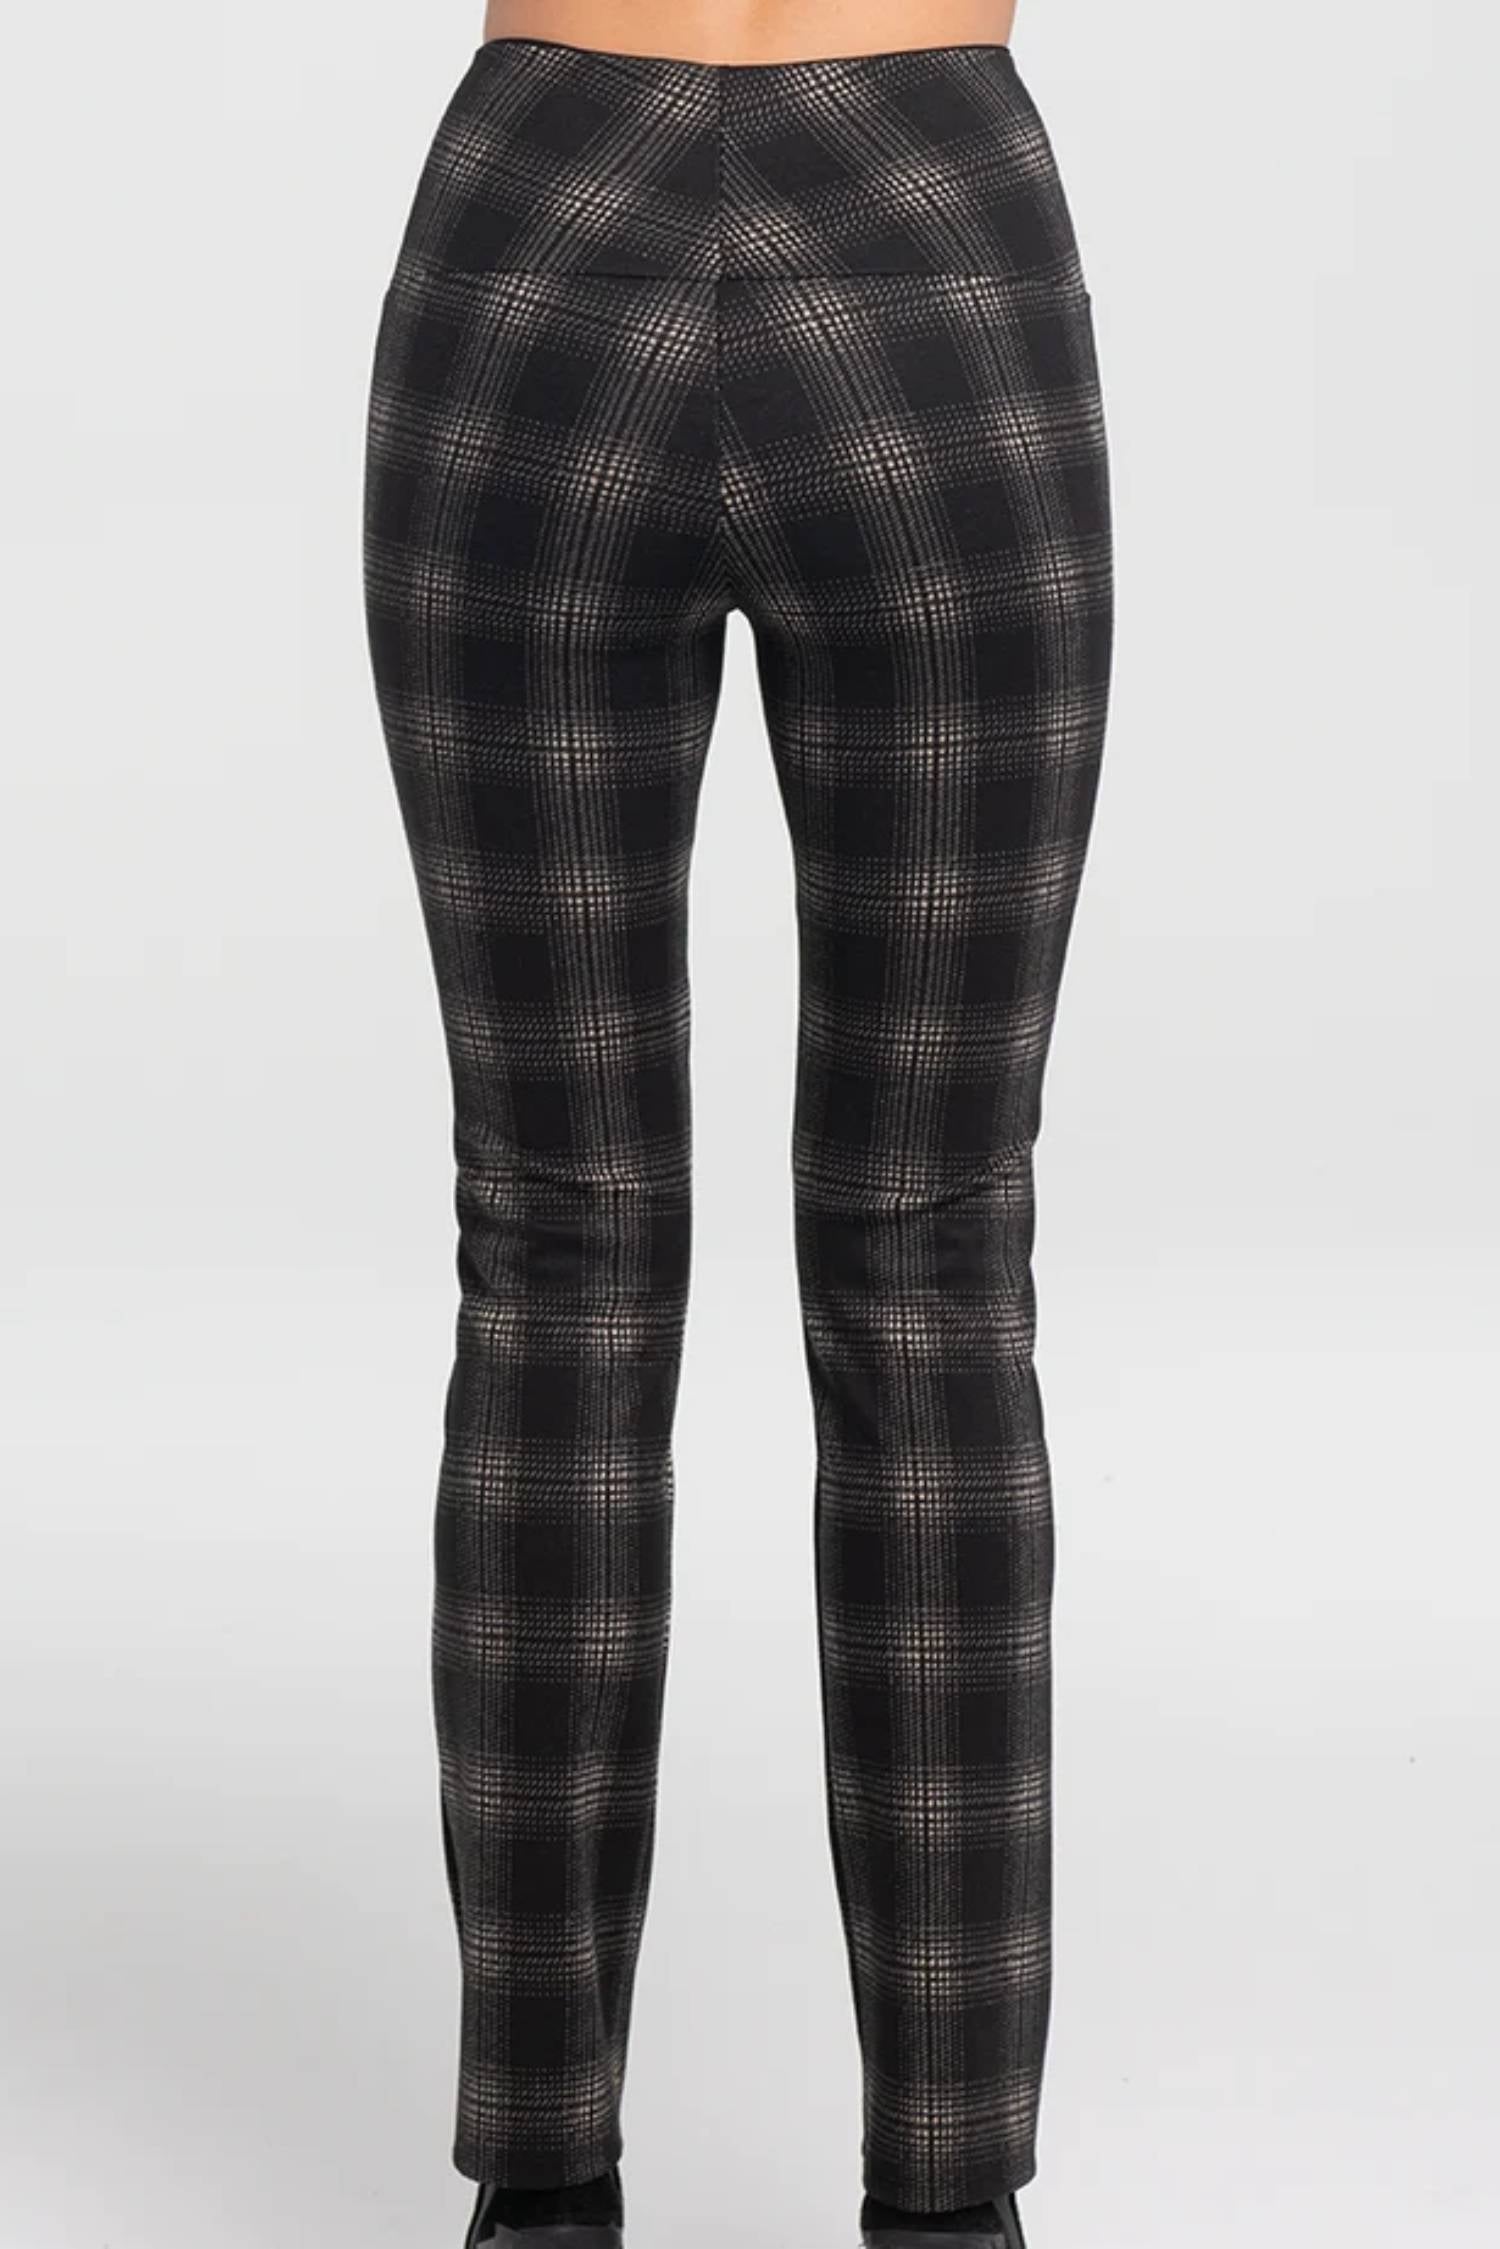 Irena Pants by Kollontai, Black, back view, plaid, pull on waist, slim fit, patch pockets, sizes XS to XXL, made in Montreal